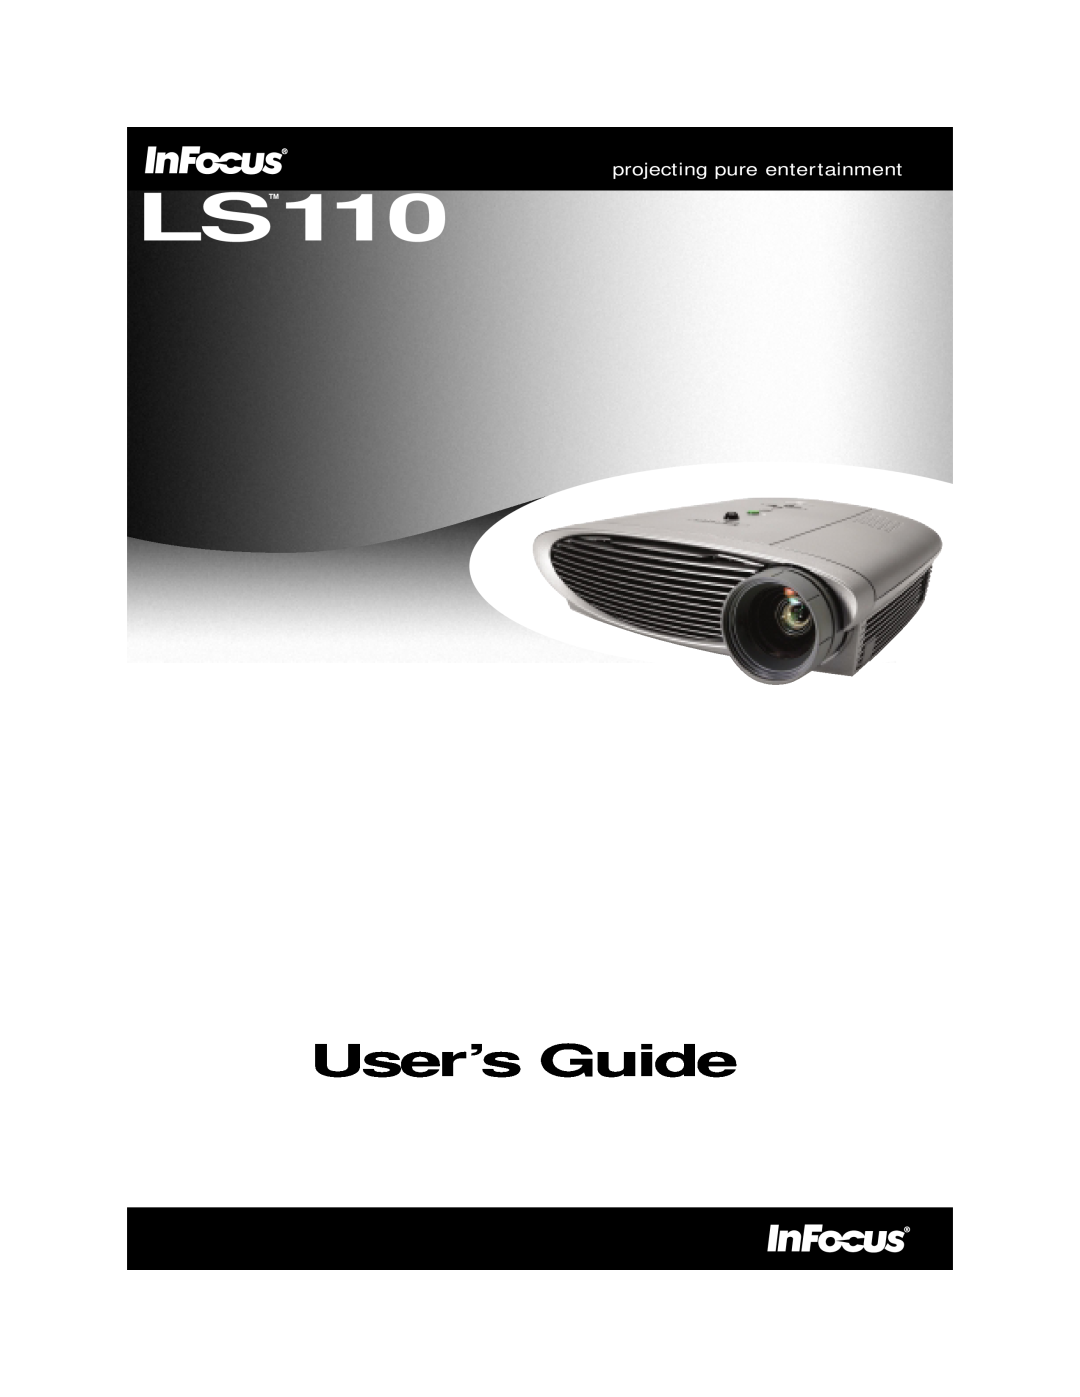 InFocus LS110 manual User’s Guide, projecting pure entertainment 